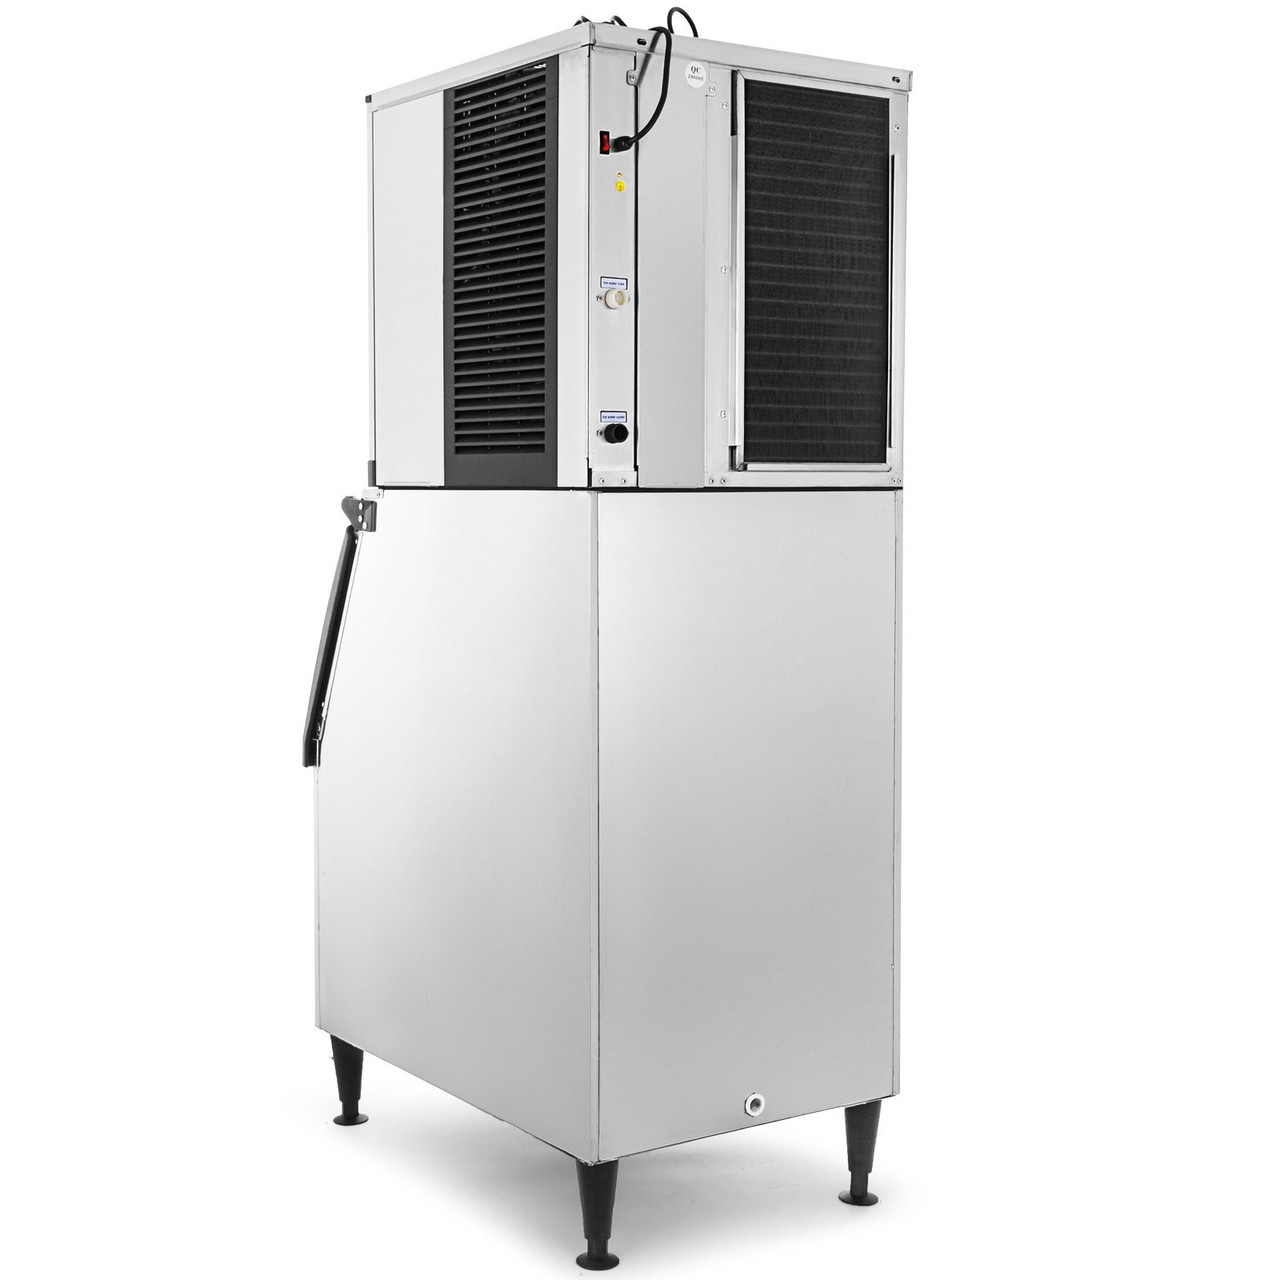 VEVOR Commercial Ice Maker Machine, ETL Approved 400LBS/24H LCD Panel Commercial Ice Machine with 350LBS Storage for Home Bar Coffee Shop, SECOP Compressor, Air Cooled, Include Scoops & Water Filter